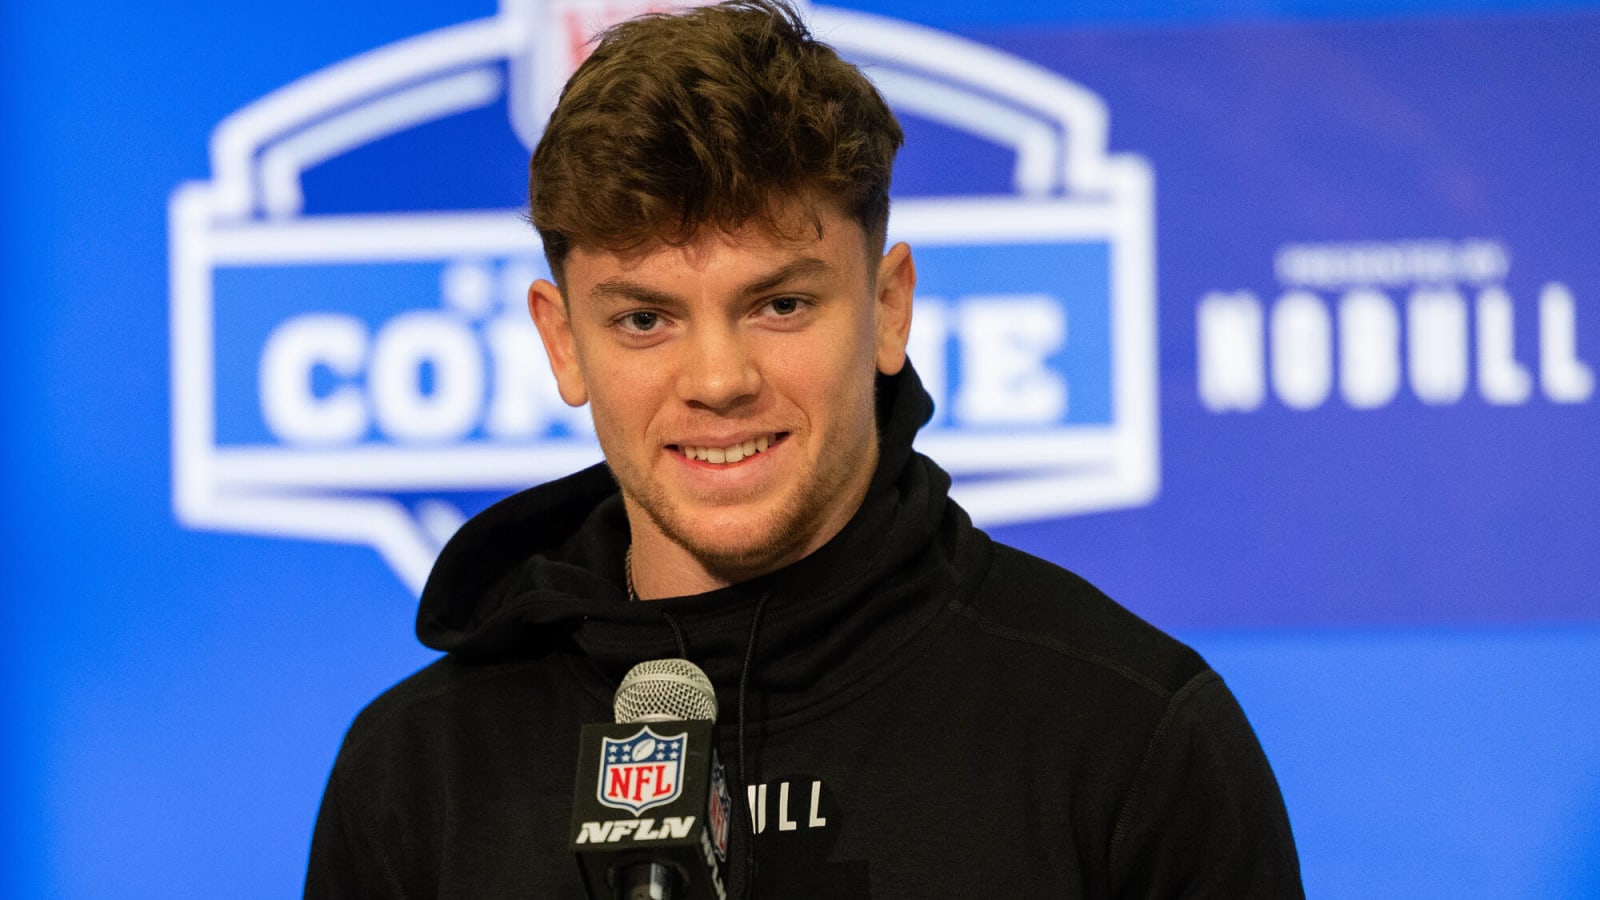 NFL Scout Doesn’t Hold Back On Eagles’ Selection Of Cooper DeJean